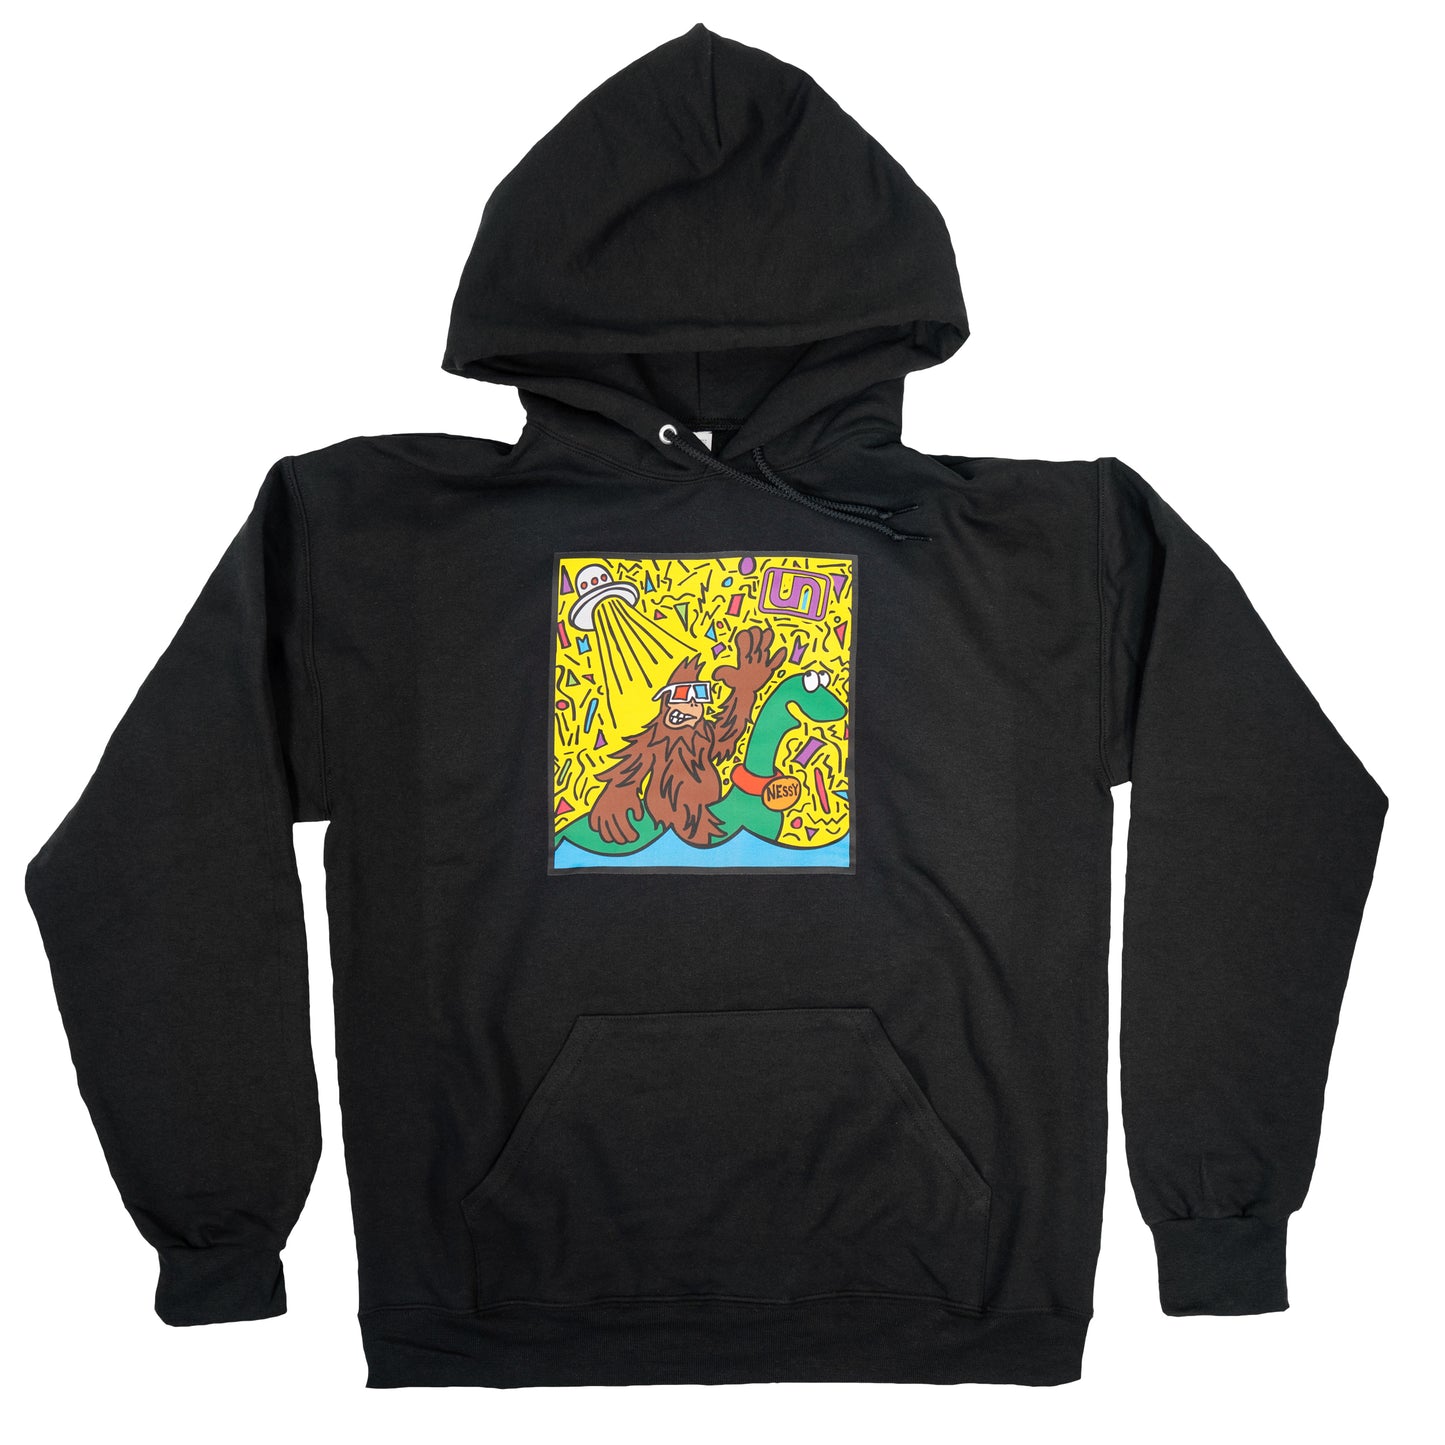 Don't Believe the Hype Black Hoodie